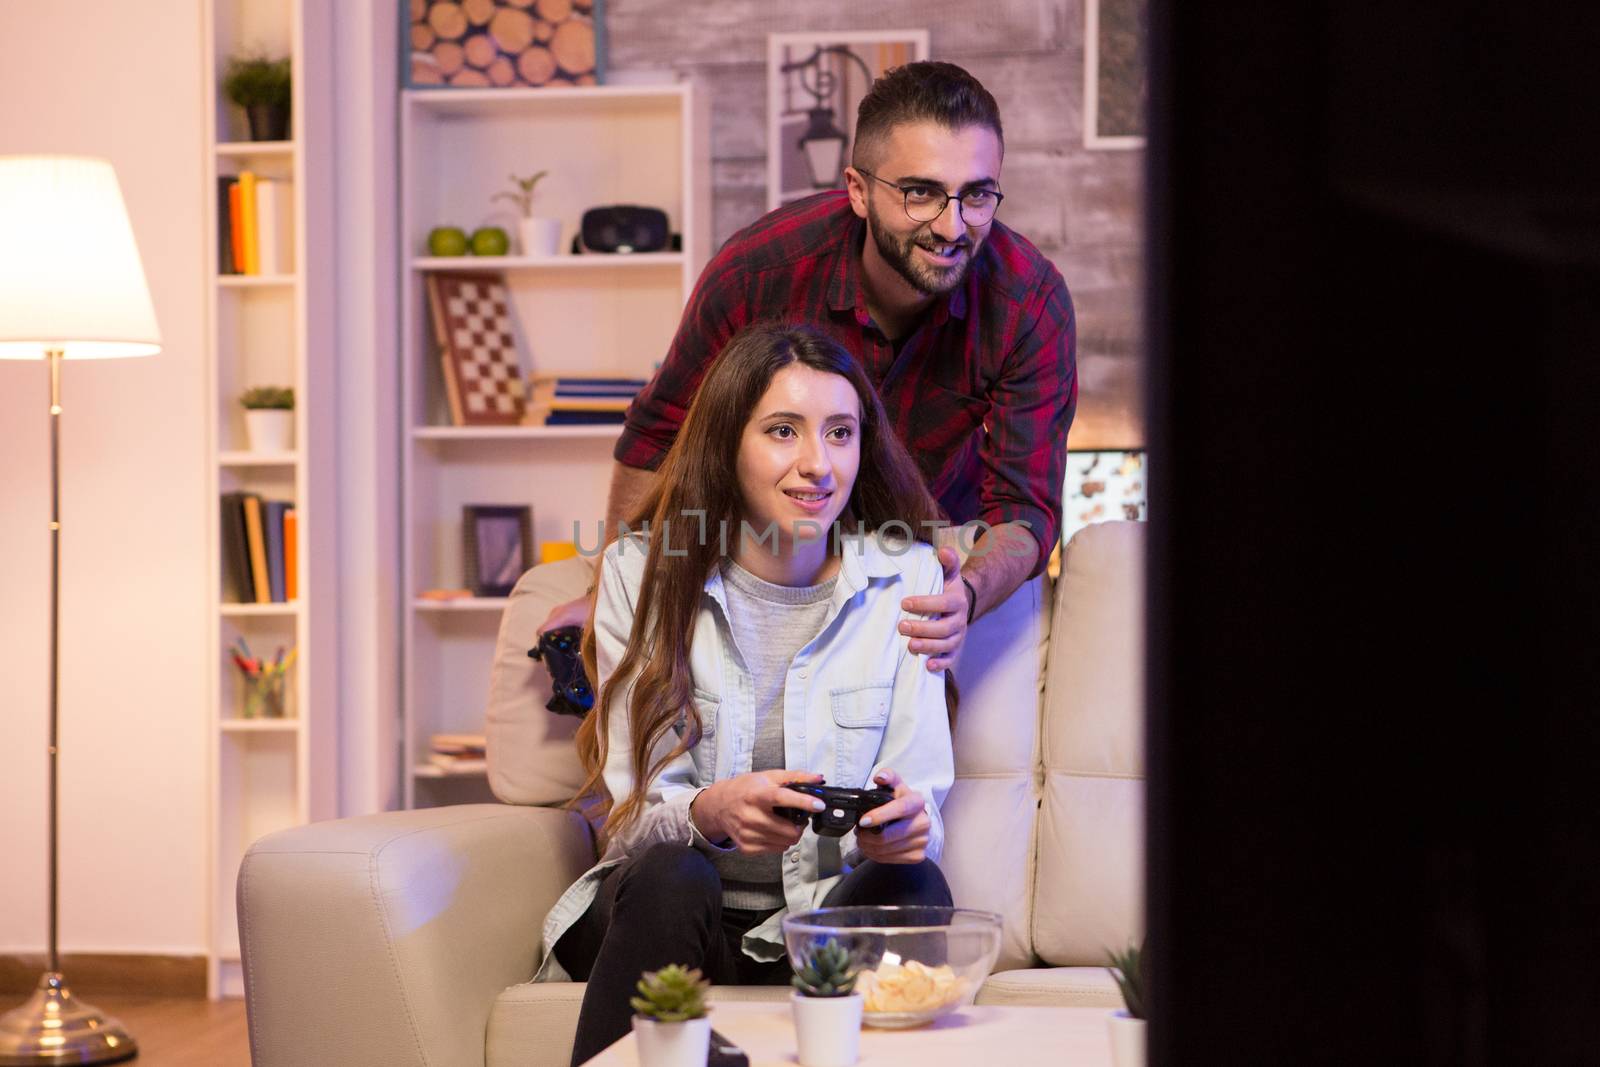 Happy young couple playing video games on television using controllers at night.